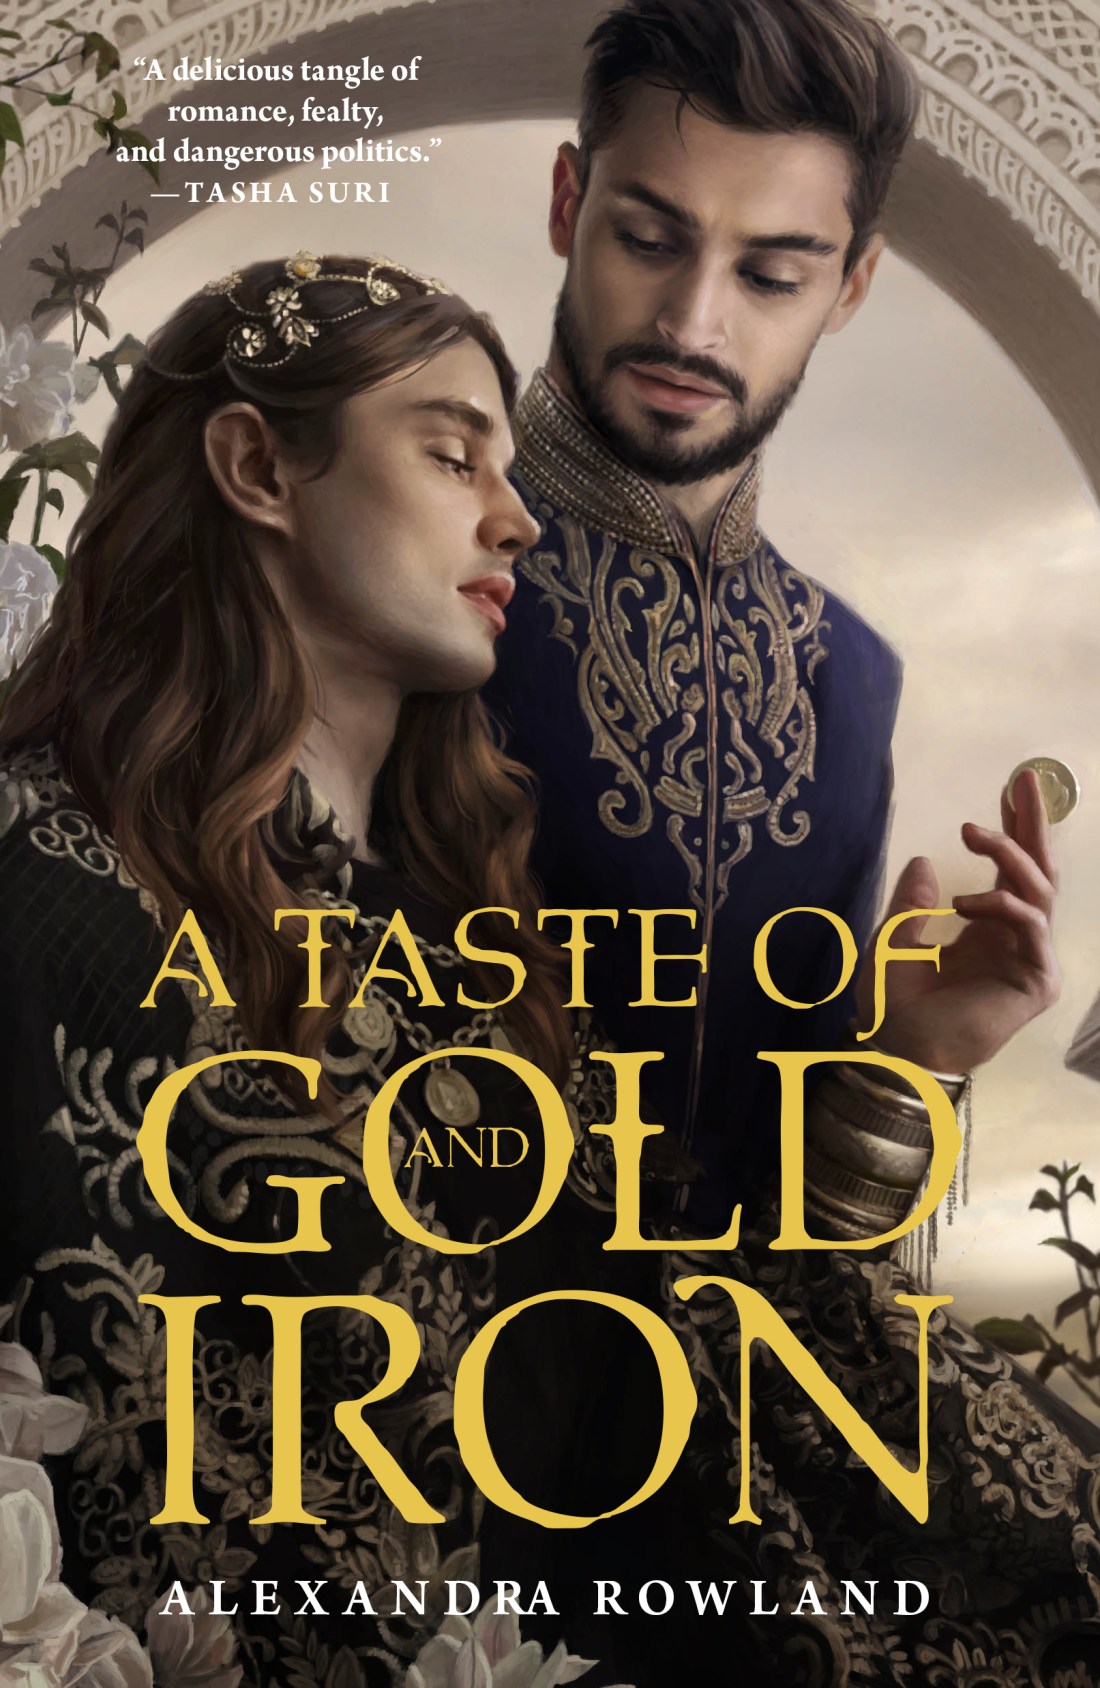 A Taste of Gold and Iron by Alexandra Rowland PDF Download